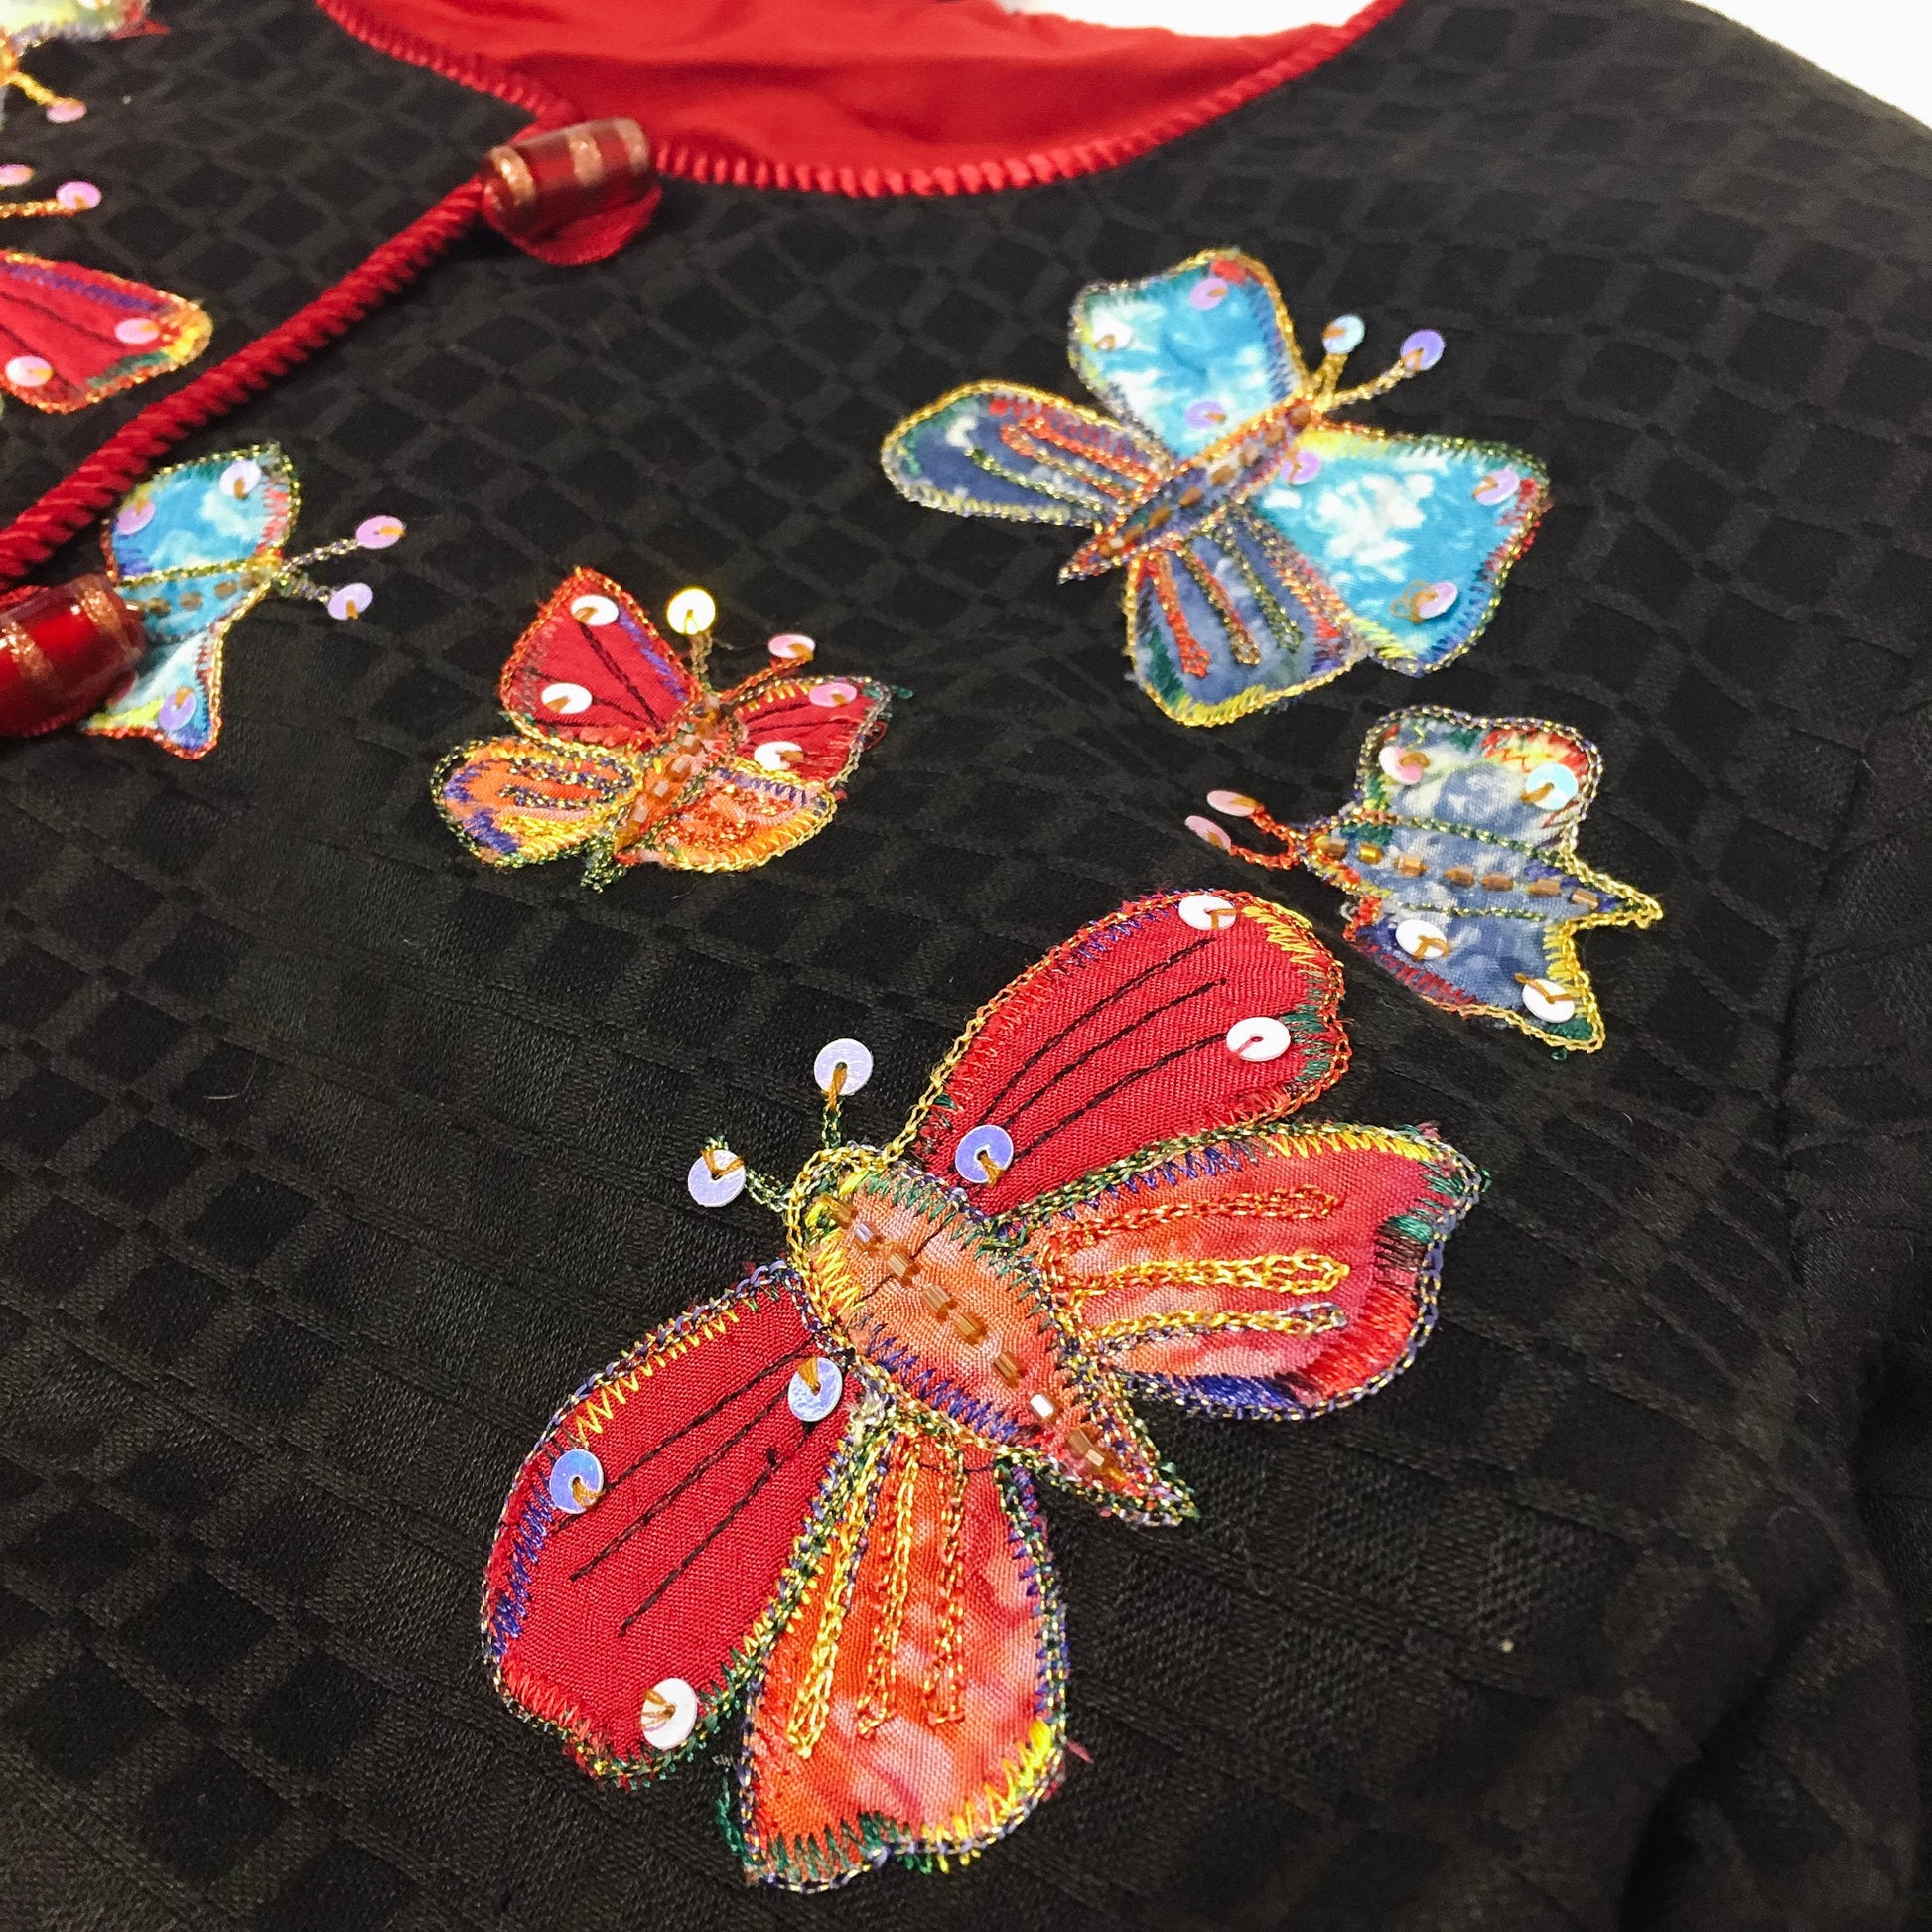 NWT Vintage Indigo Moon Black Light Jacket with Colorful Butterfly Details. sz. L